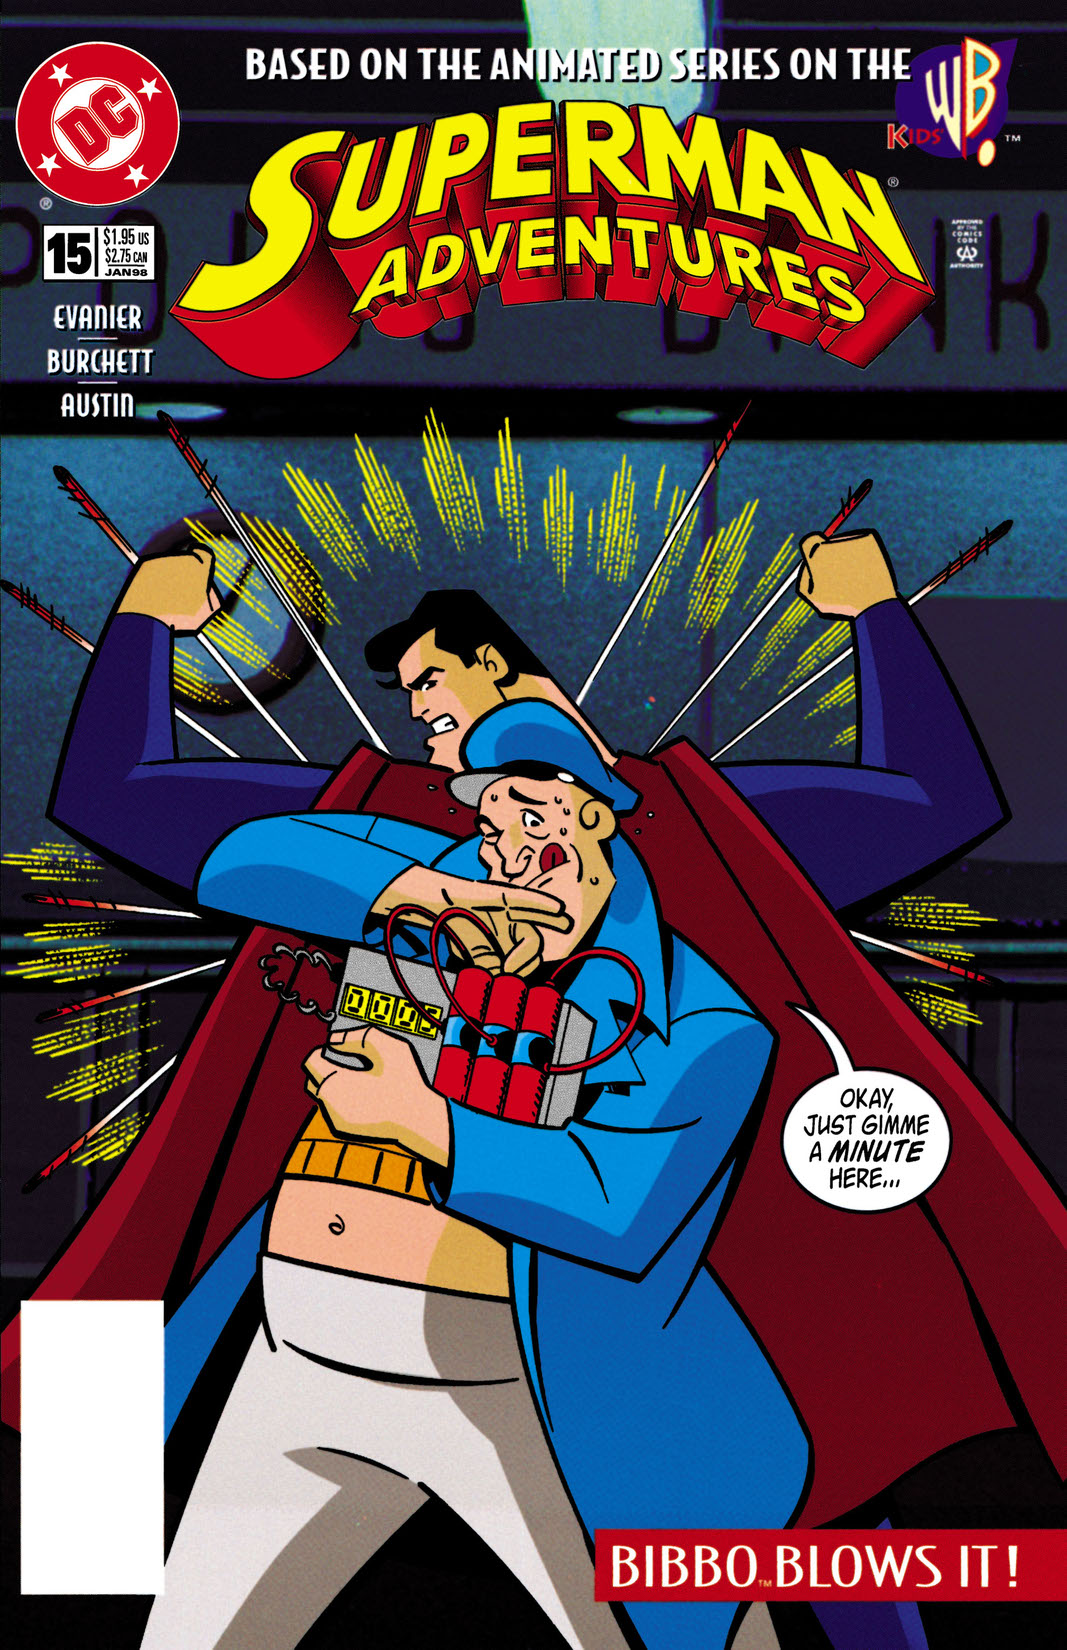 Superman Adventures #15 preview images